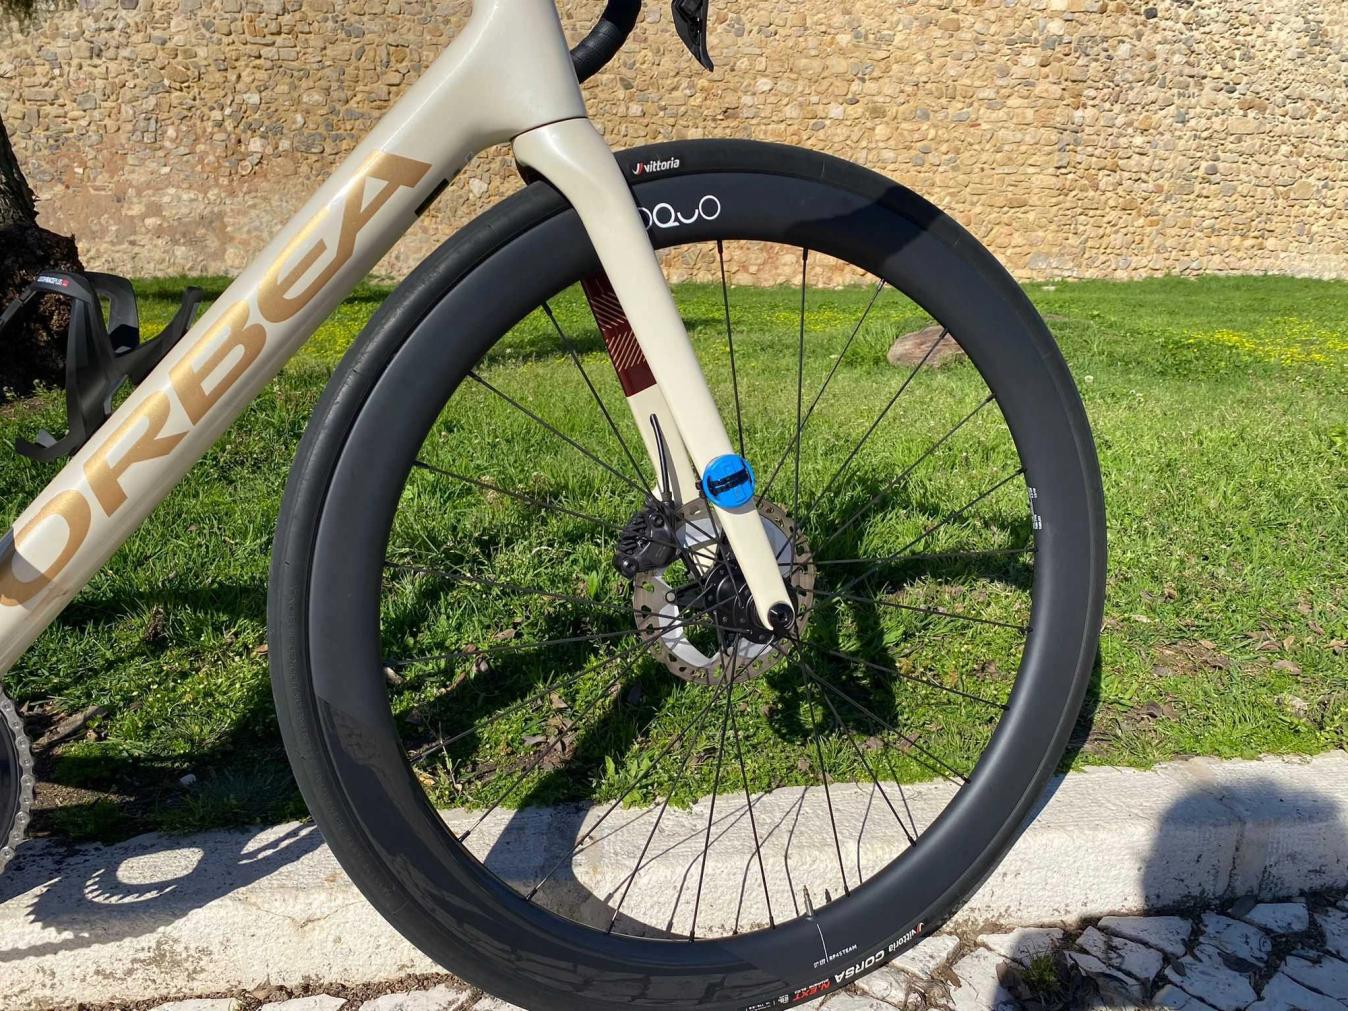 Wheels from Orbea-owned Oquo